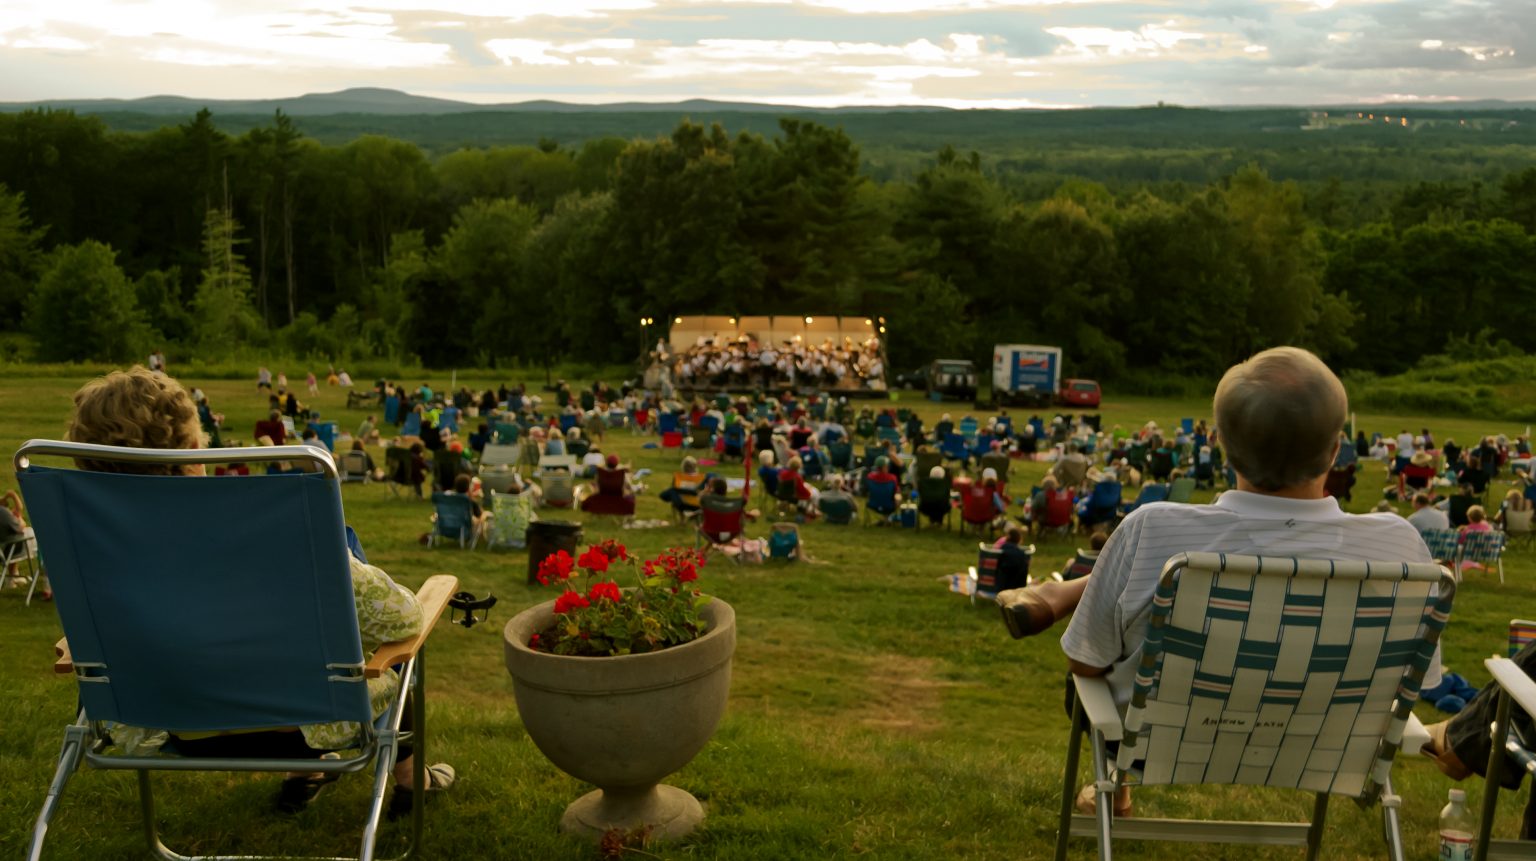 Massachusetts Summer Concerts The Trustees of Reservations